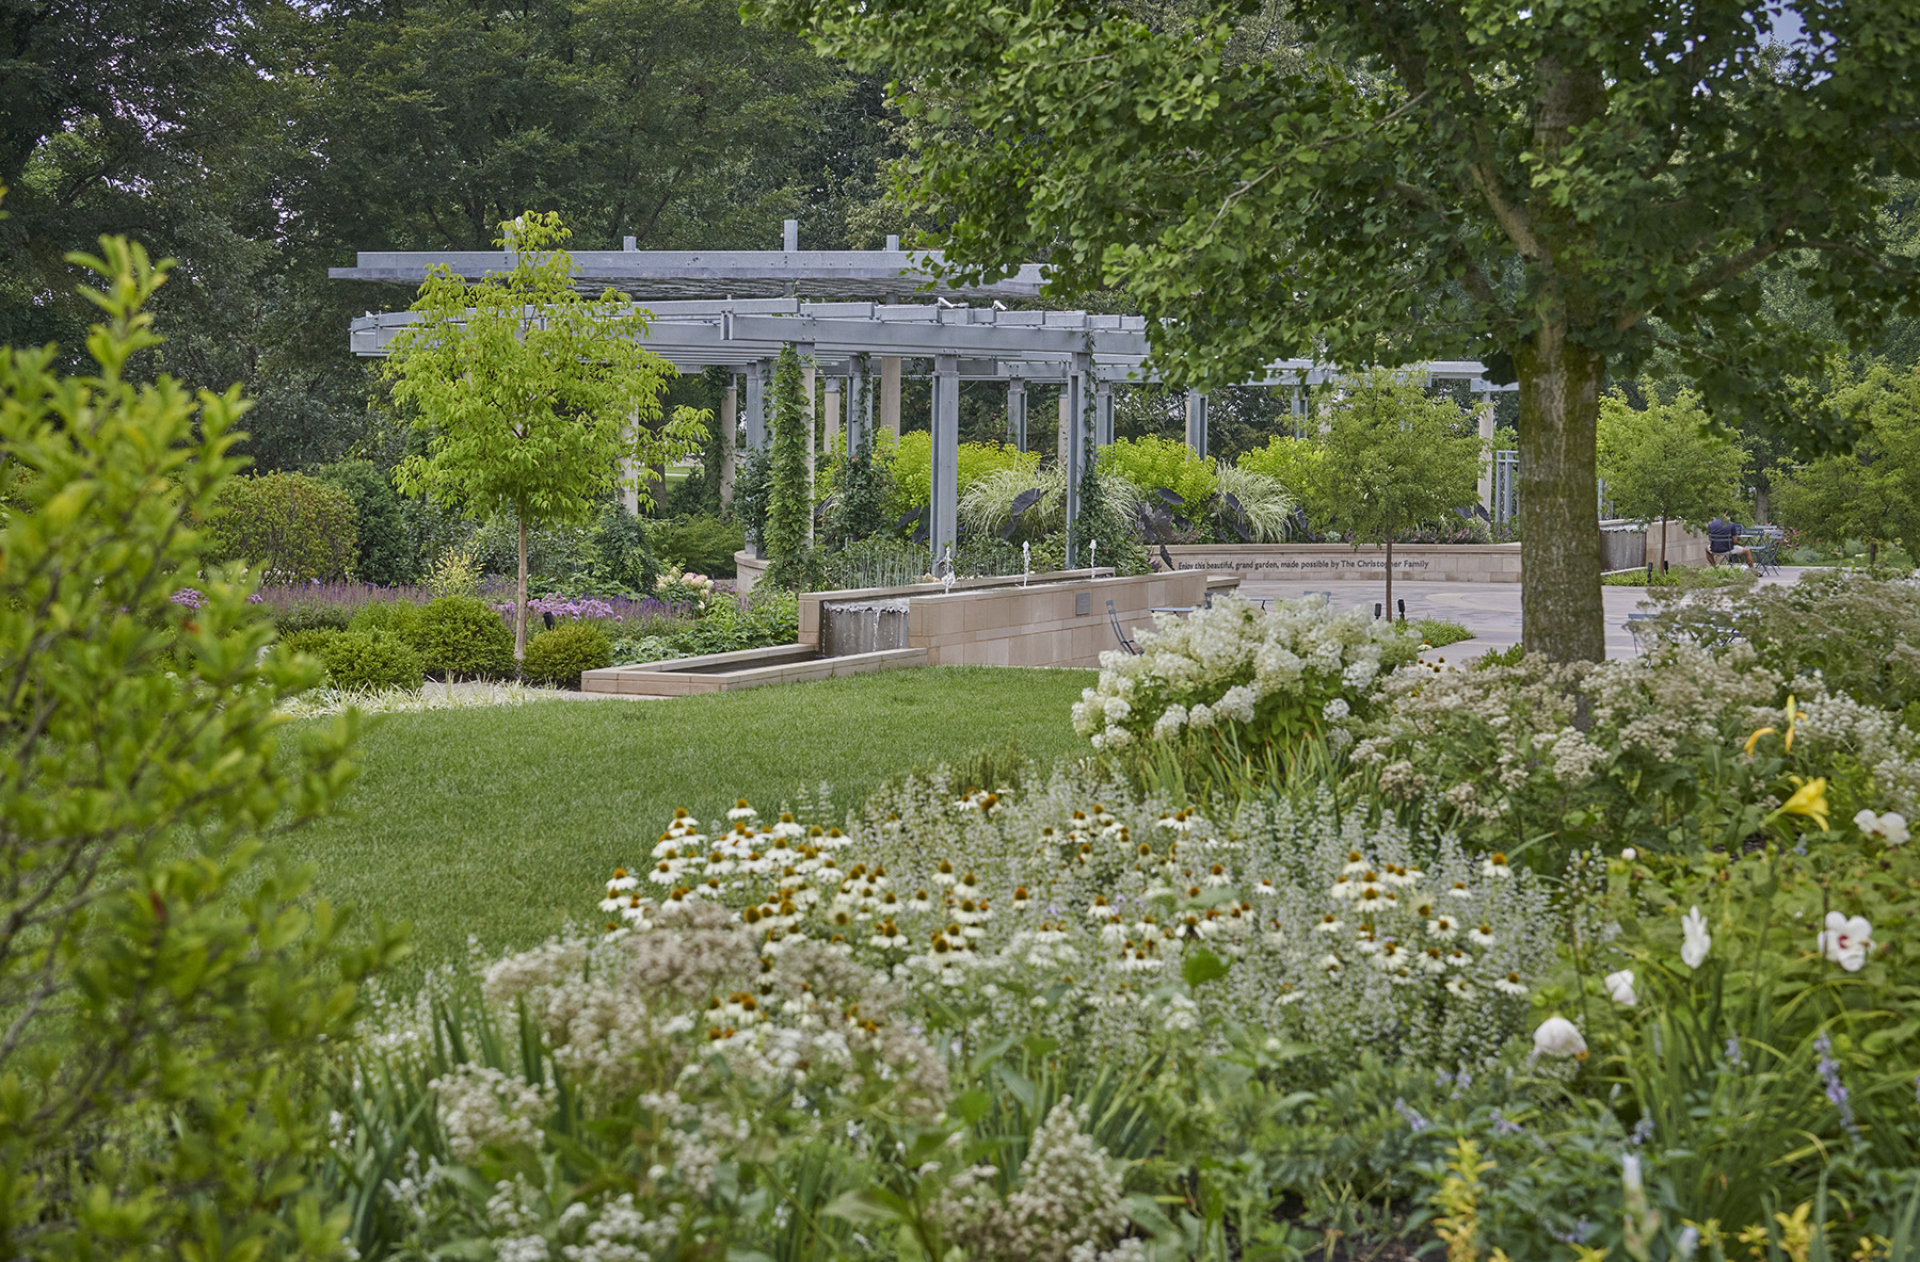 Photography of The Gerard T Donnelly Grand Garden at The Morton Arboretum featuring the white garden room called The Celebration Garden